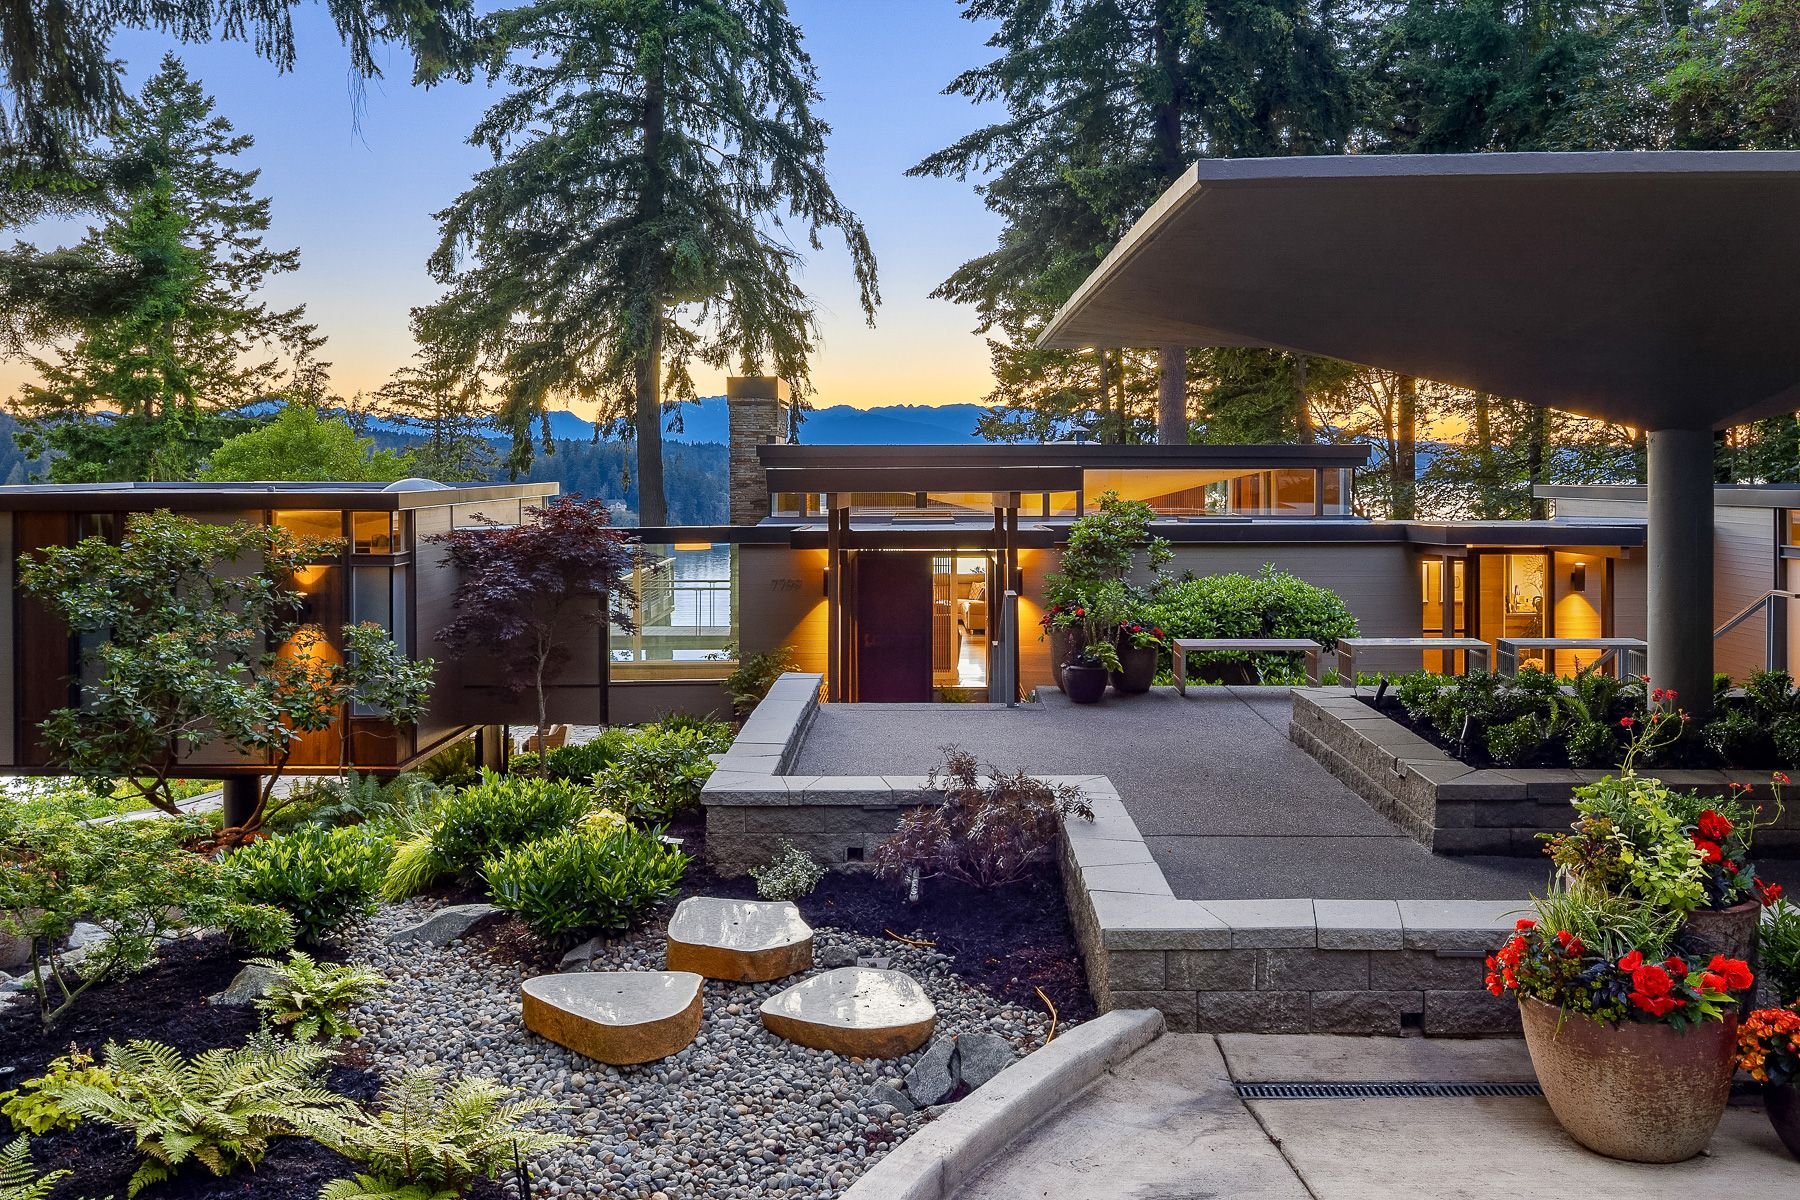 NW Modernist Architecture | $4,155,700